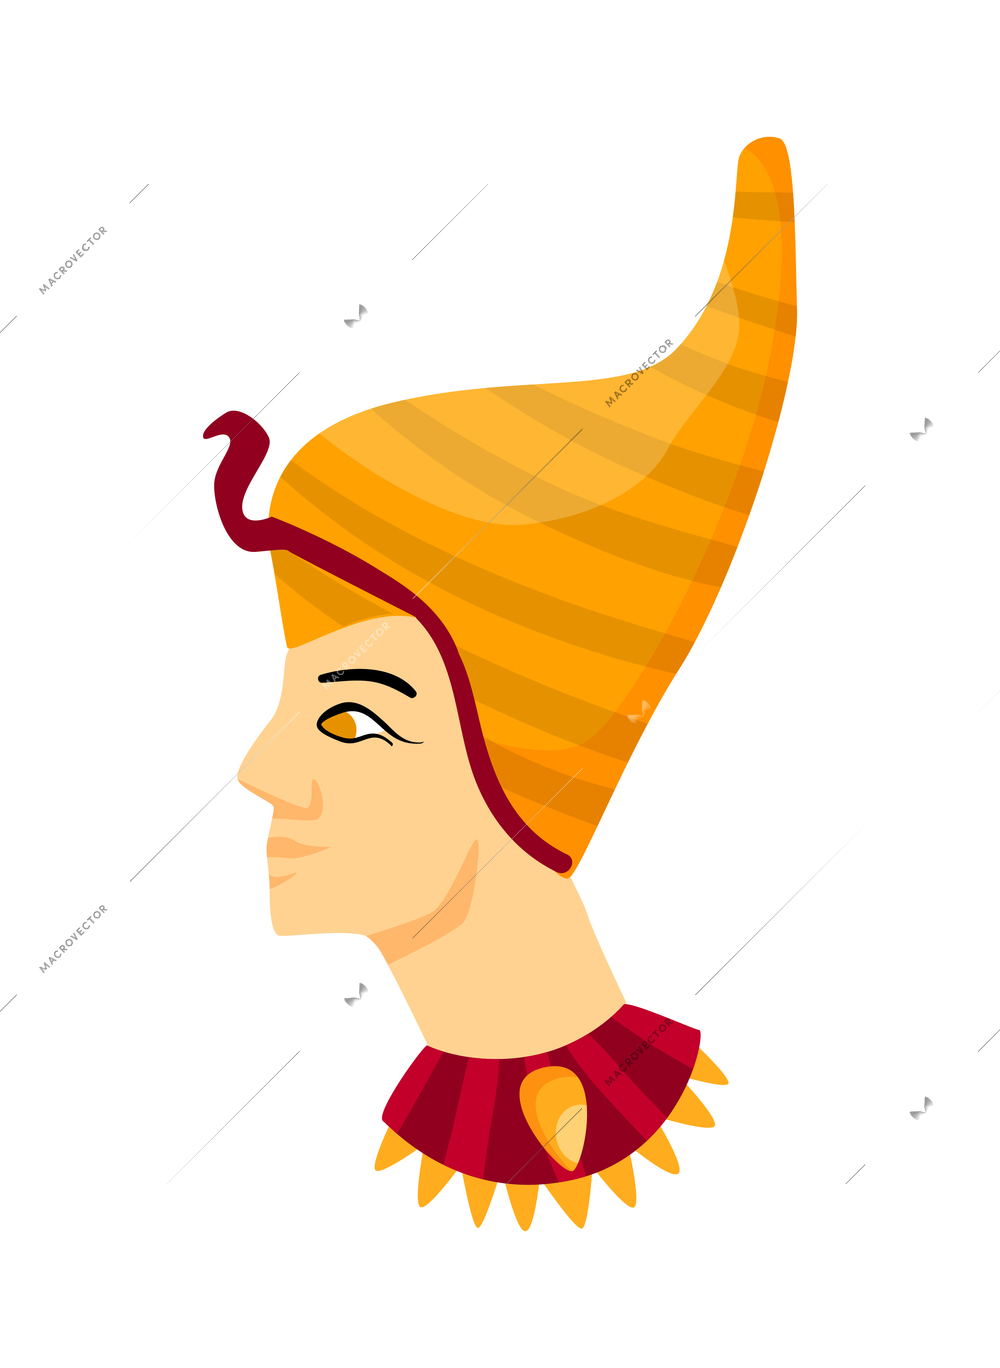 Egypt composition with isolated image of ancient egyptian character on blank background vector illustration